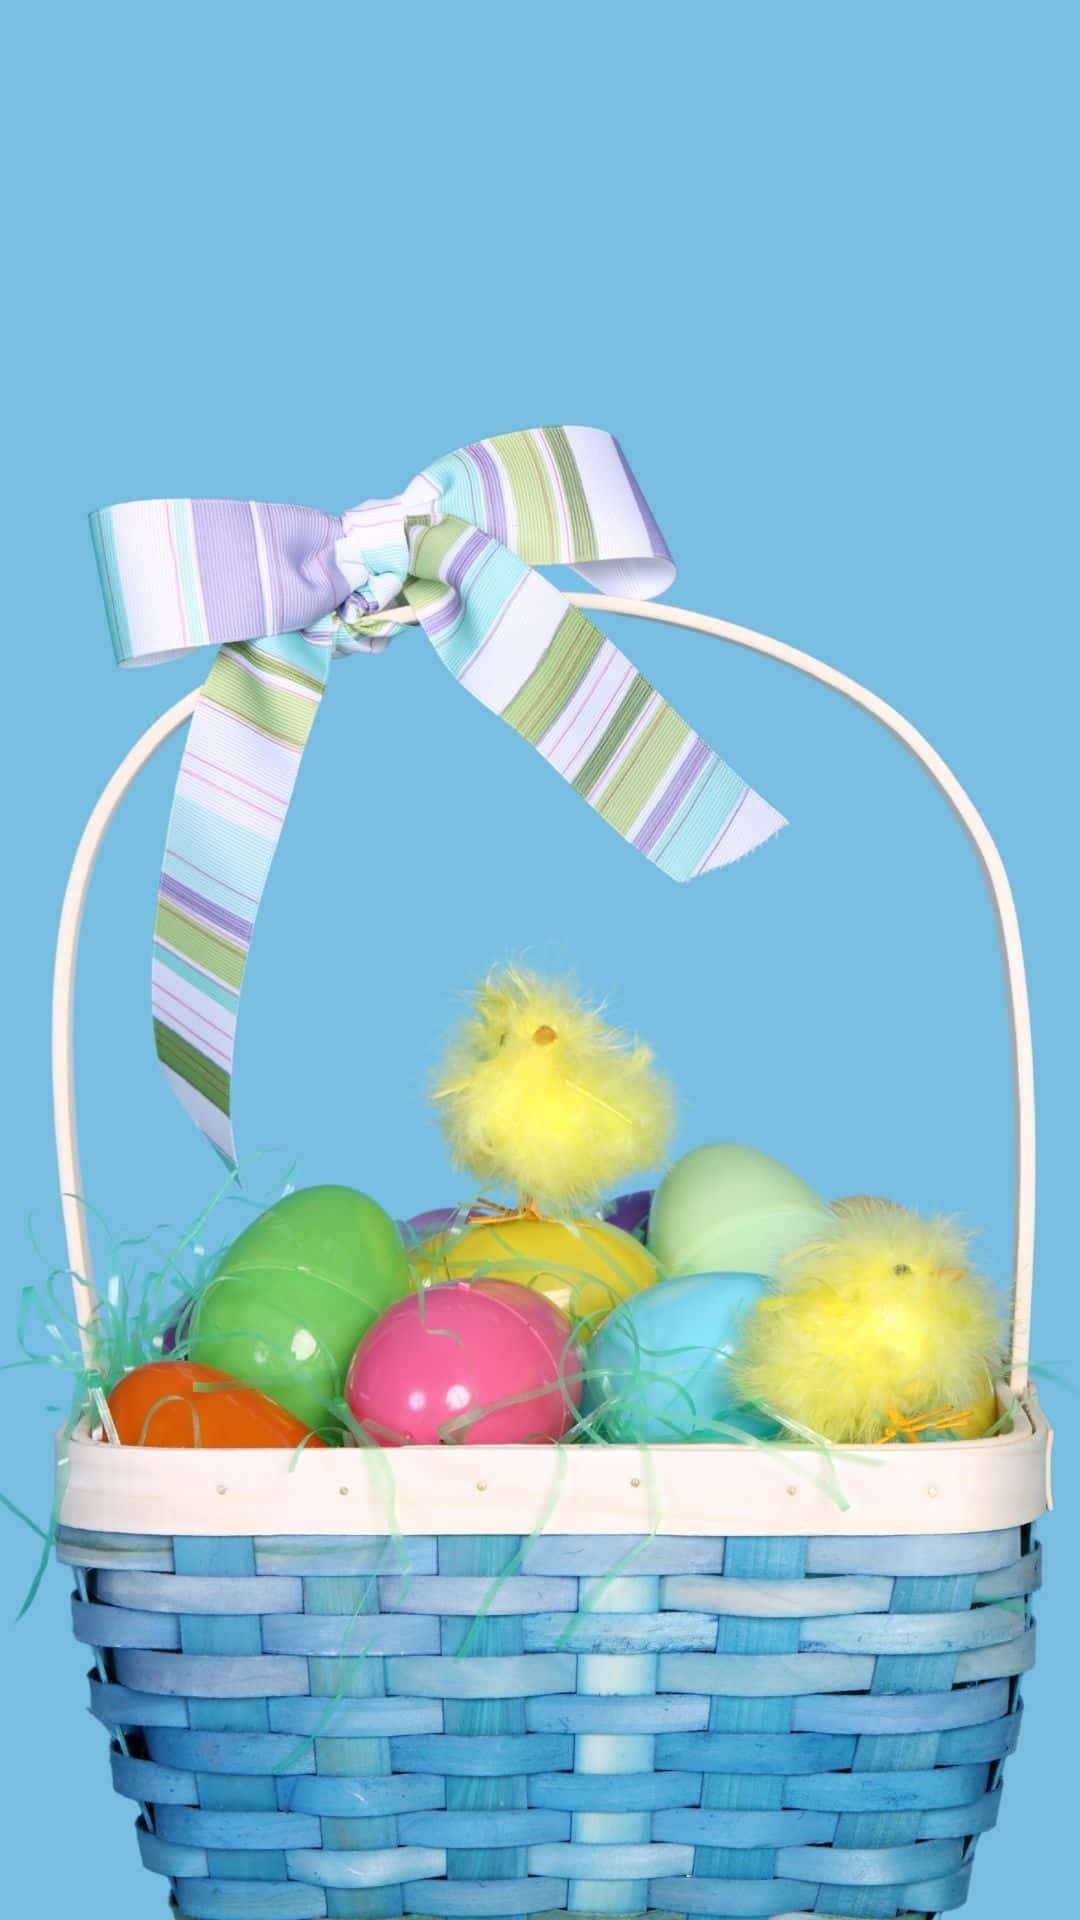 Add a touch of Spring with an Easter Basket Wallpaper